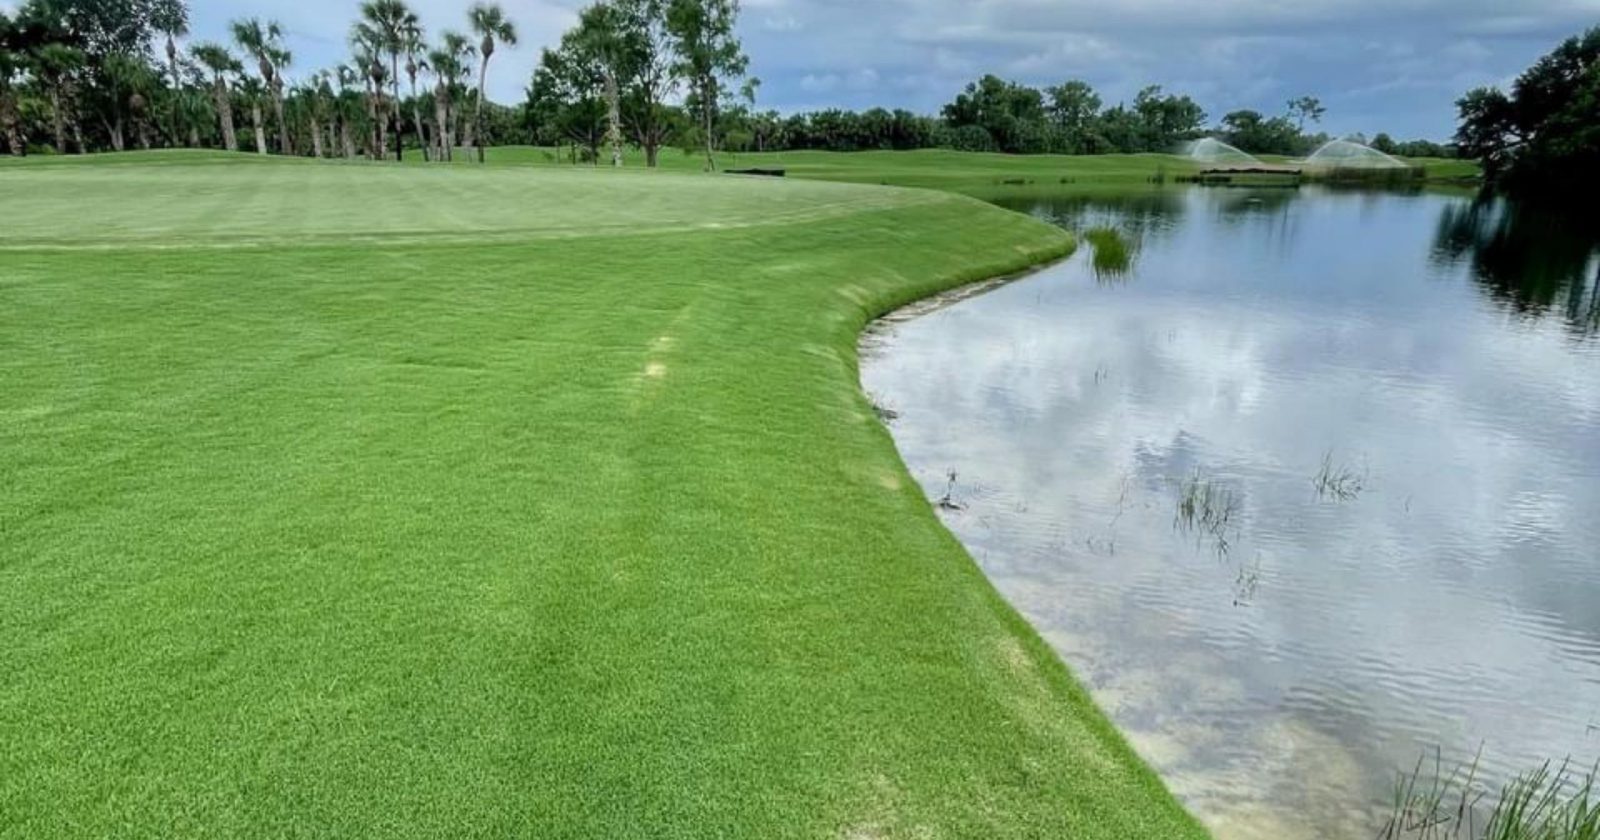 Olde Florida Golf Course: shoreline erosion control - after SOX Before and After - after erosion controlGolf Course SOX Erosion Control